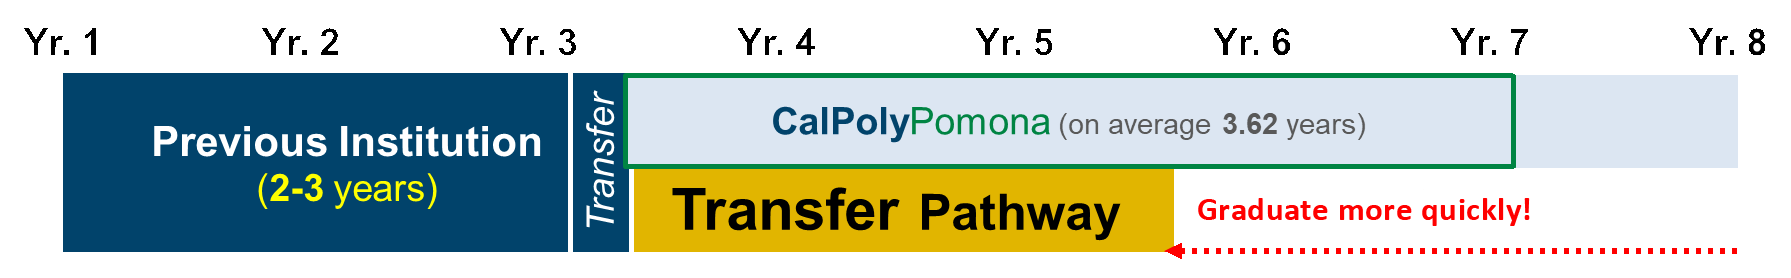 Students will graduate more quickly through Transfer Pathway, reducing their time at CPP